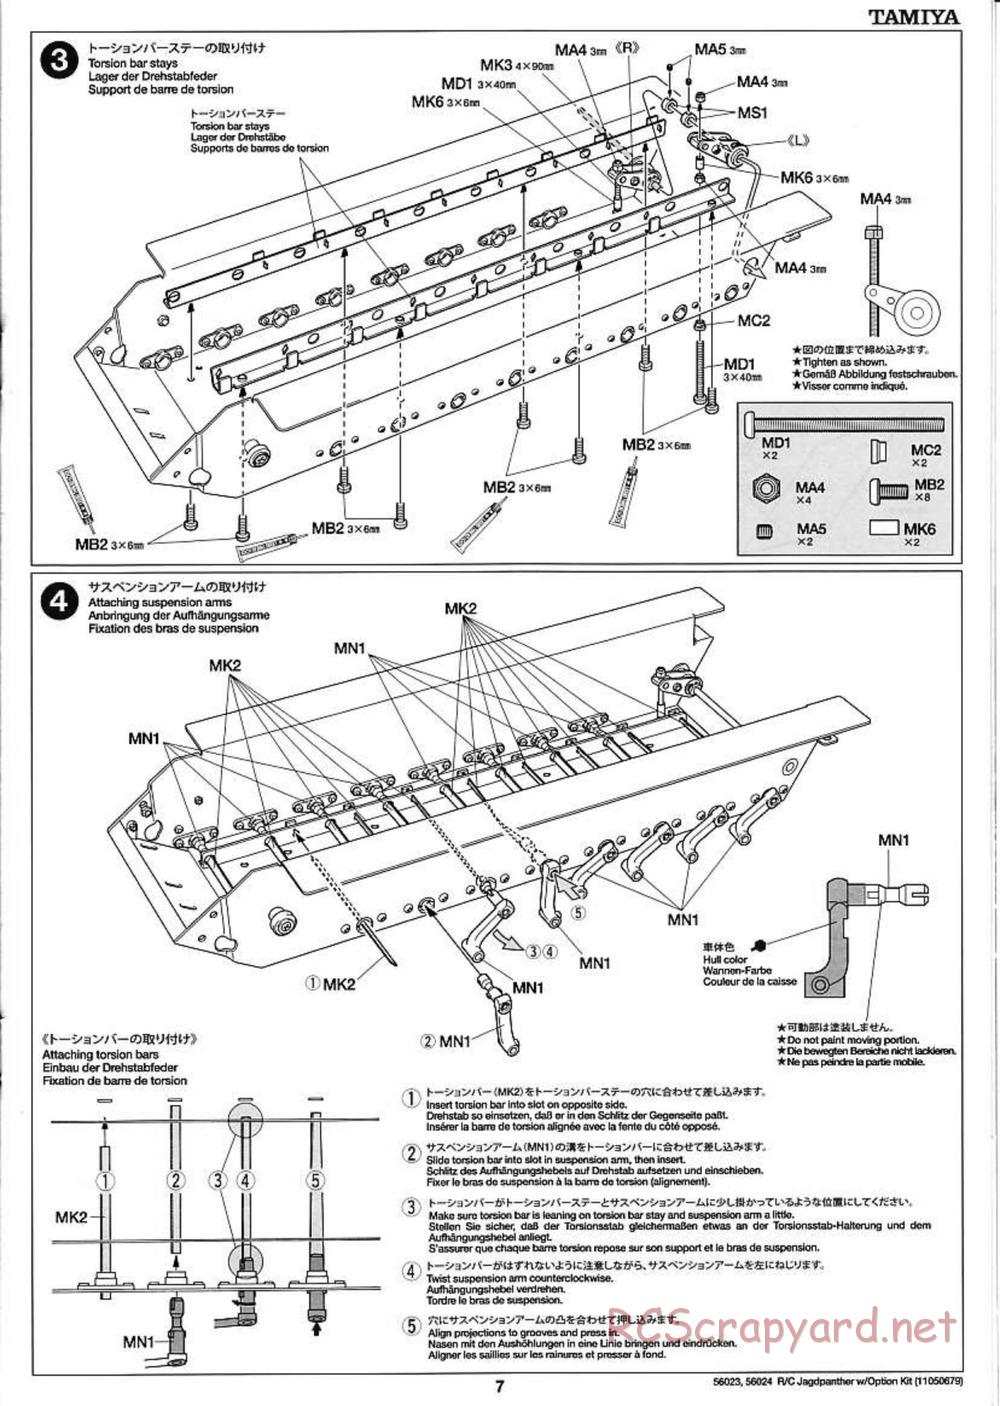 Tamiya - Jagdpanther - 1/16 Scale Chassis - Manual - Page 7